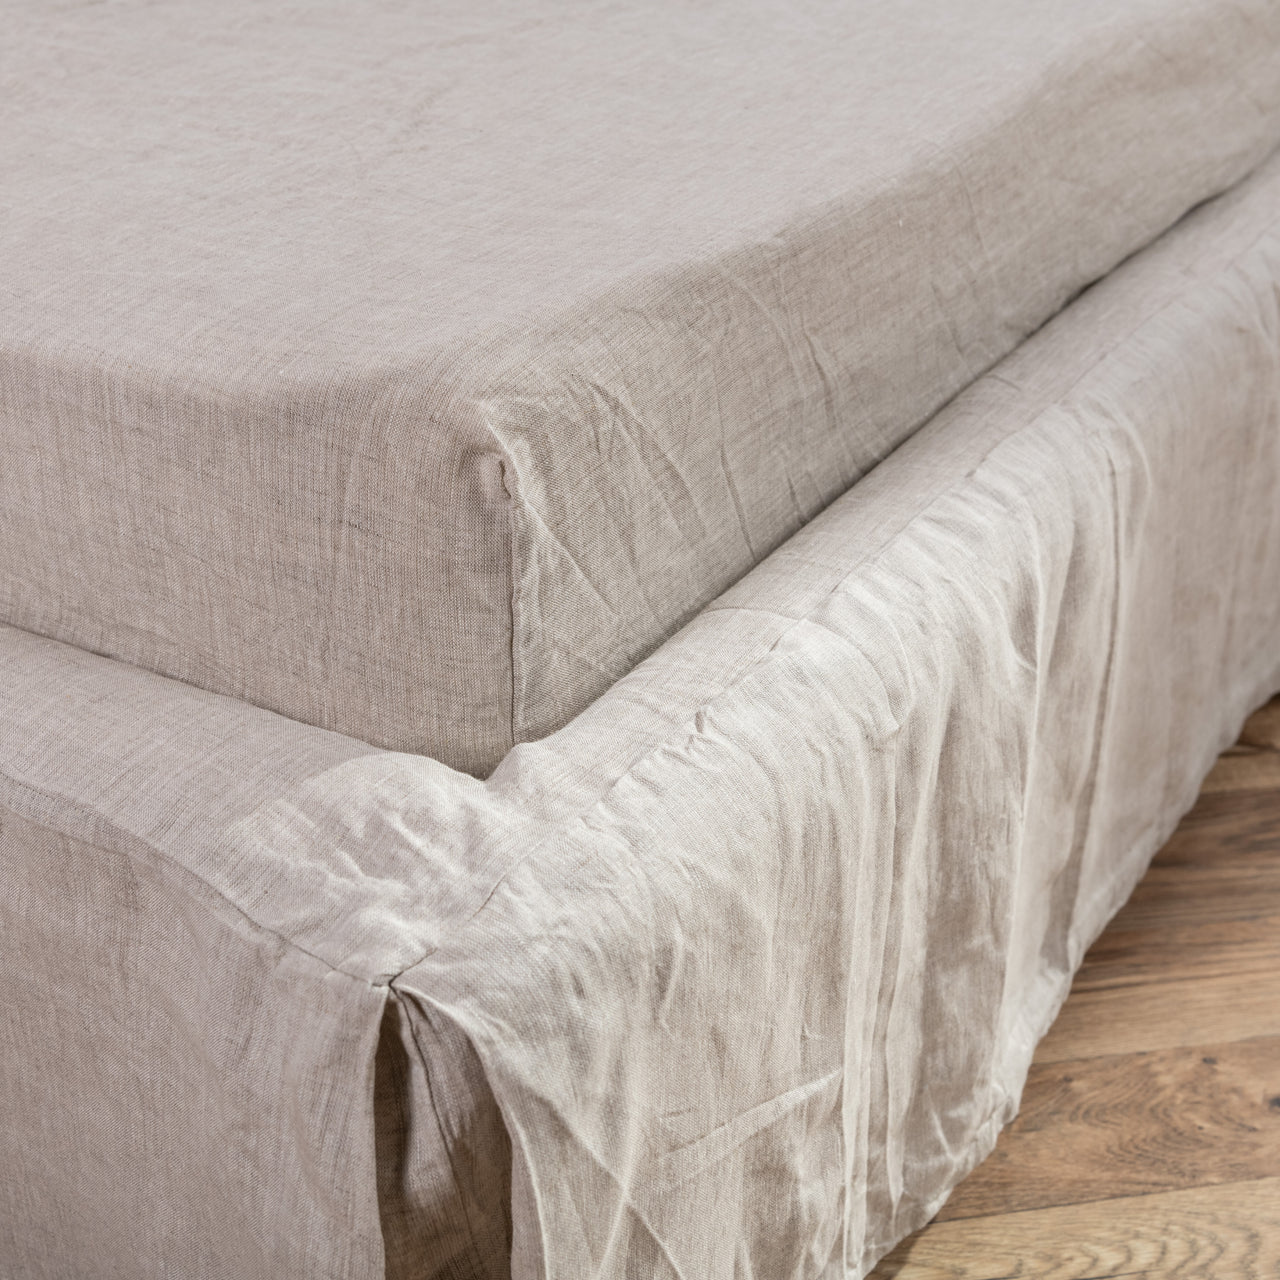 Tailored Linen Bed Skirt Pleated - Split Corners and High Drops Availa